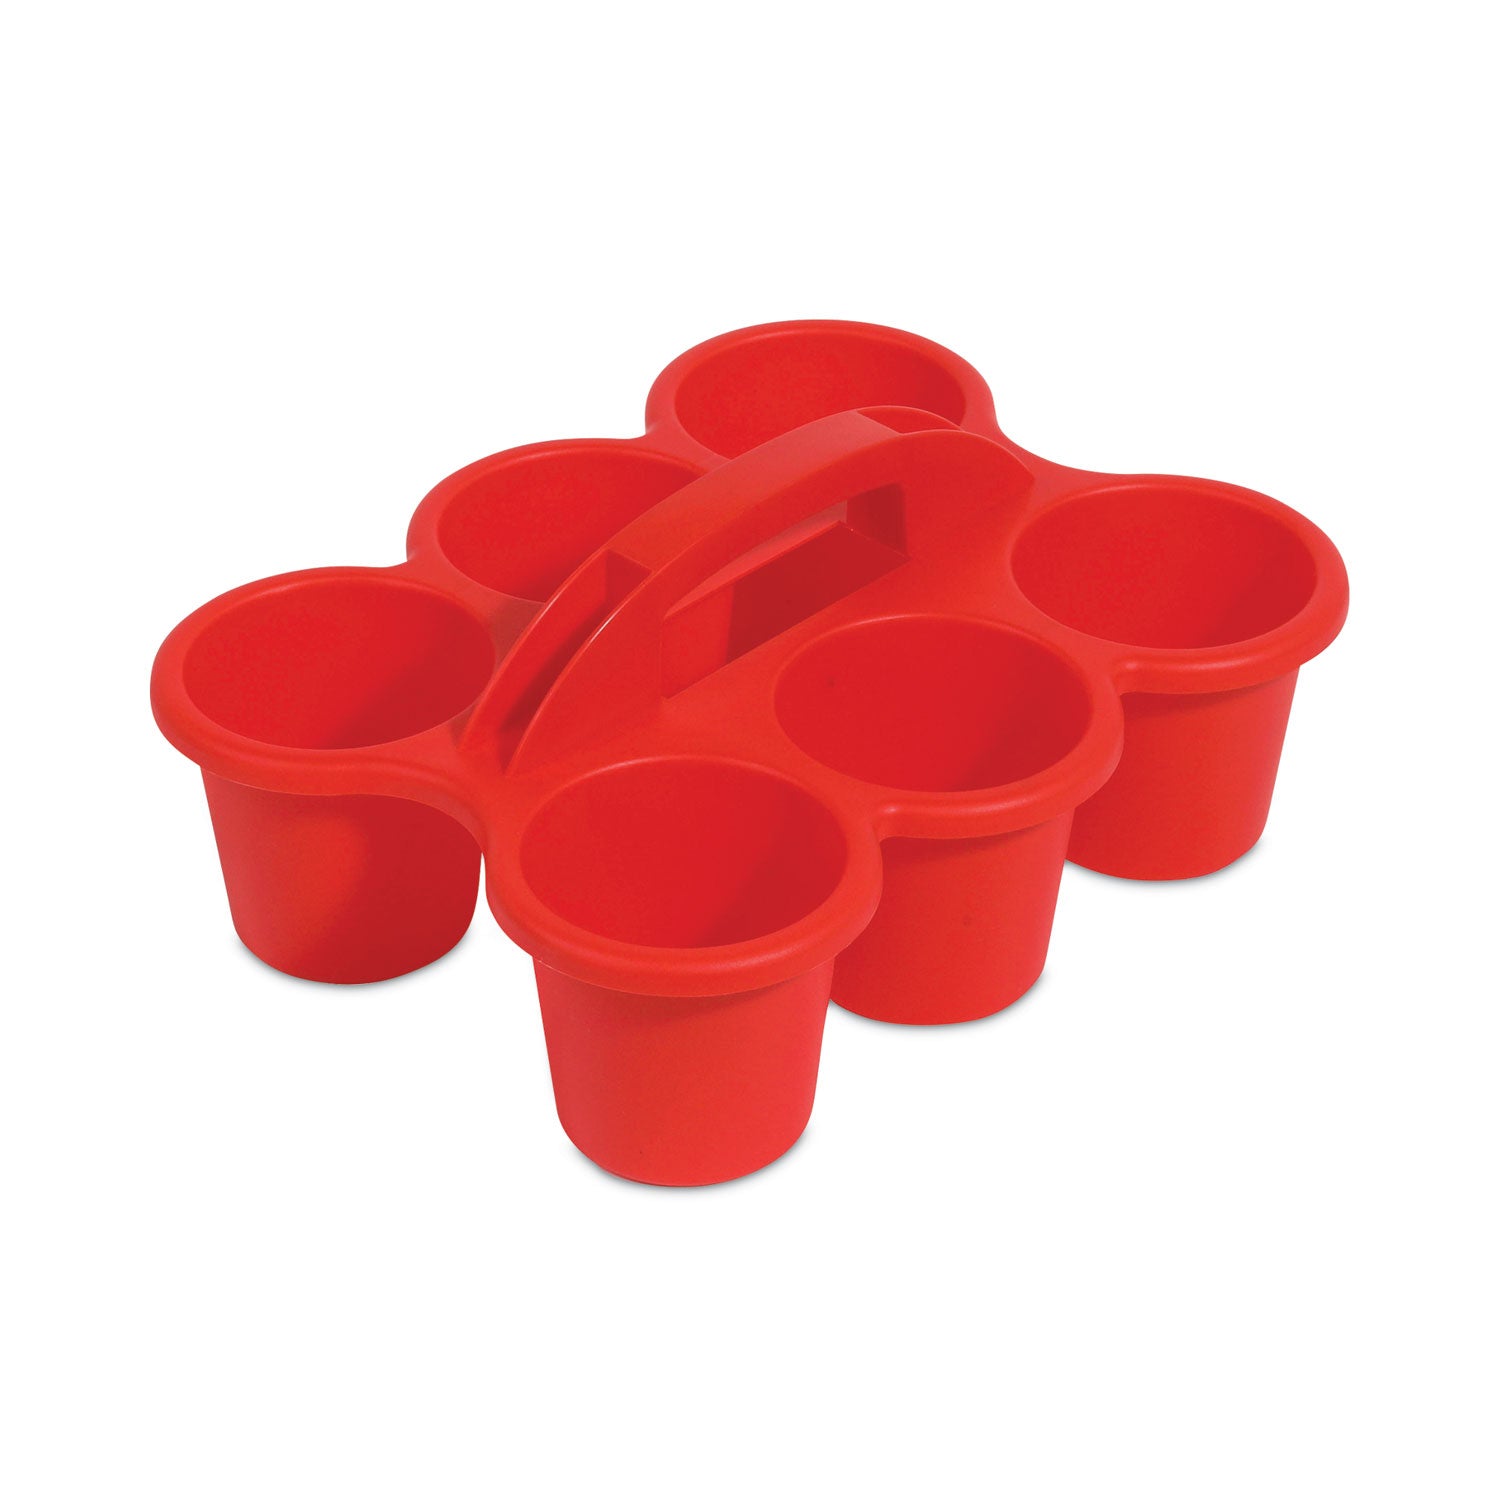 little-artist-antimicrobial-six-cup-caddy-red_def39509red - 1